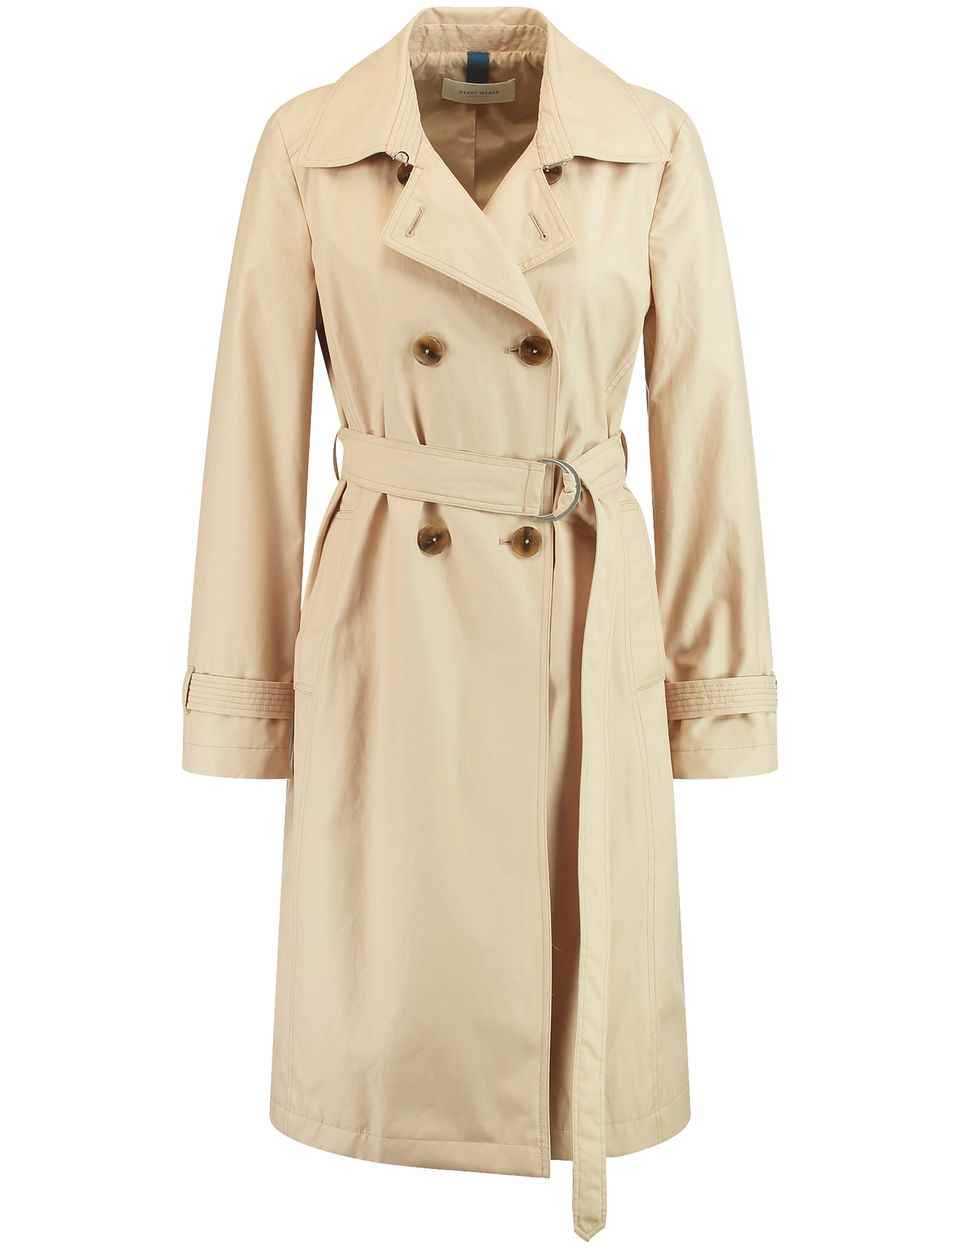 Find your own style: Trench coat